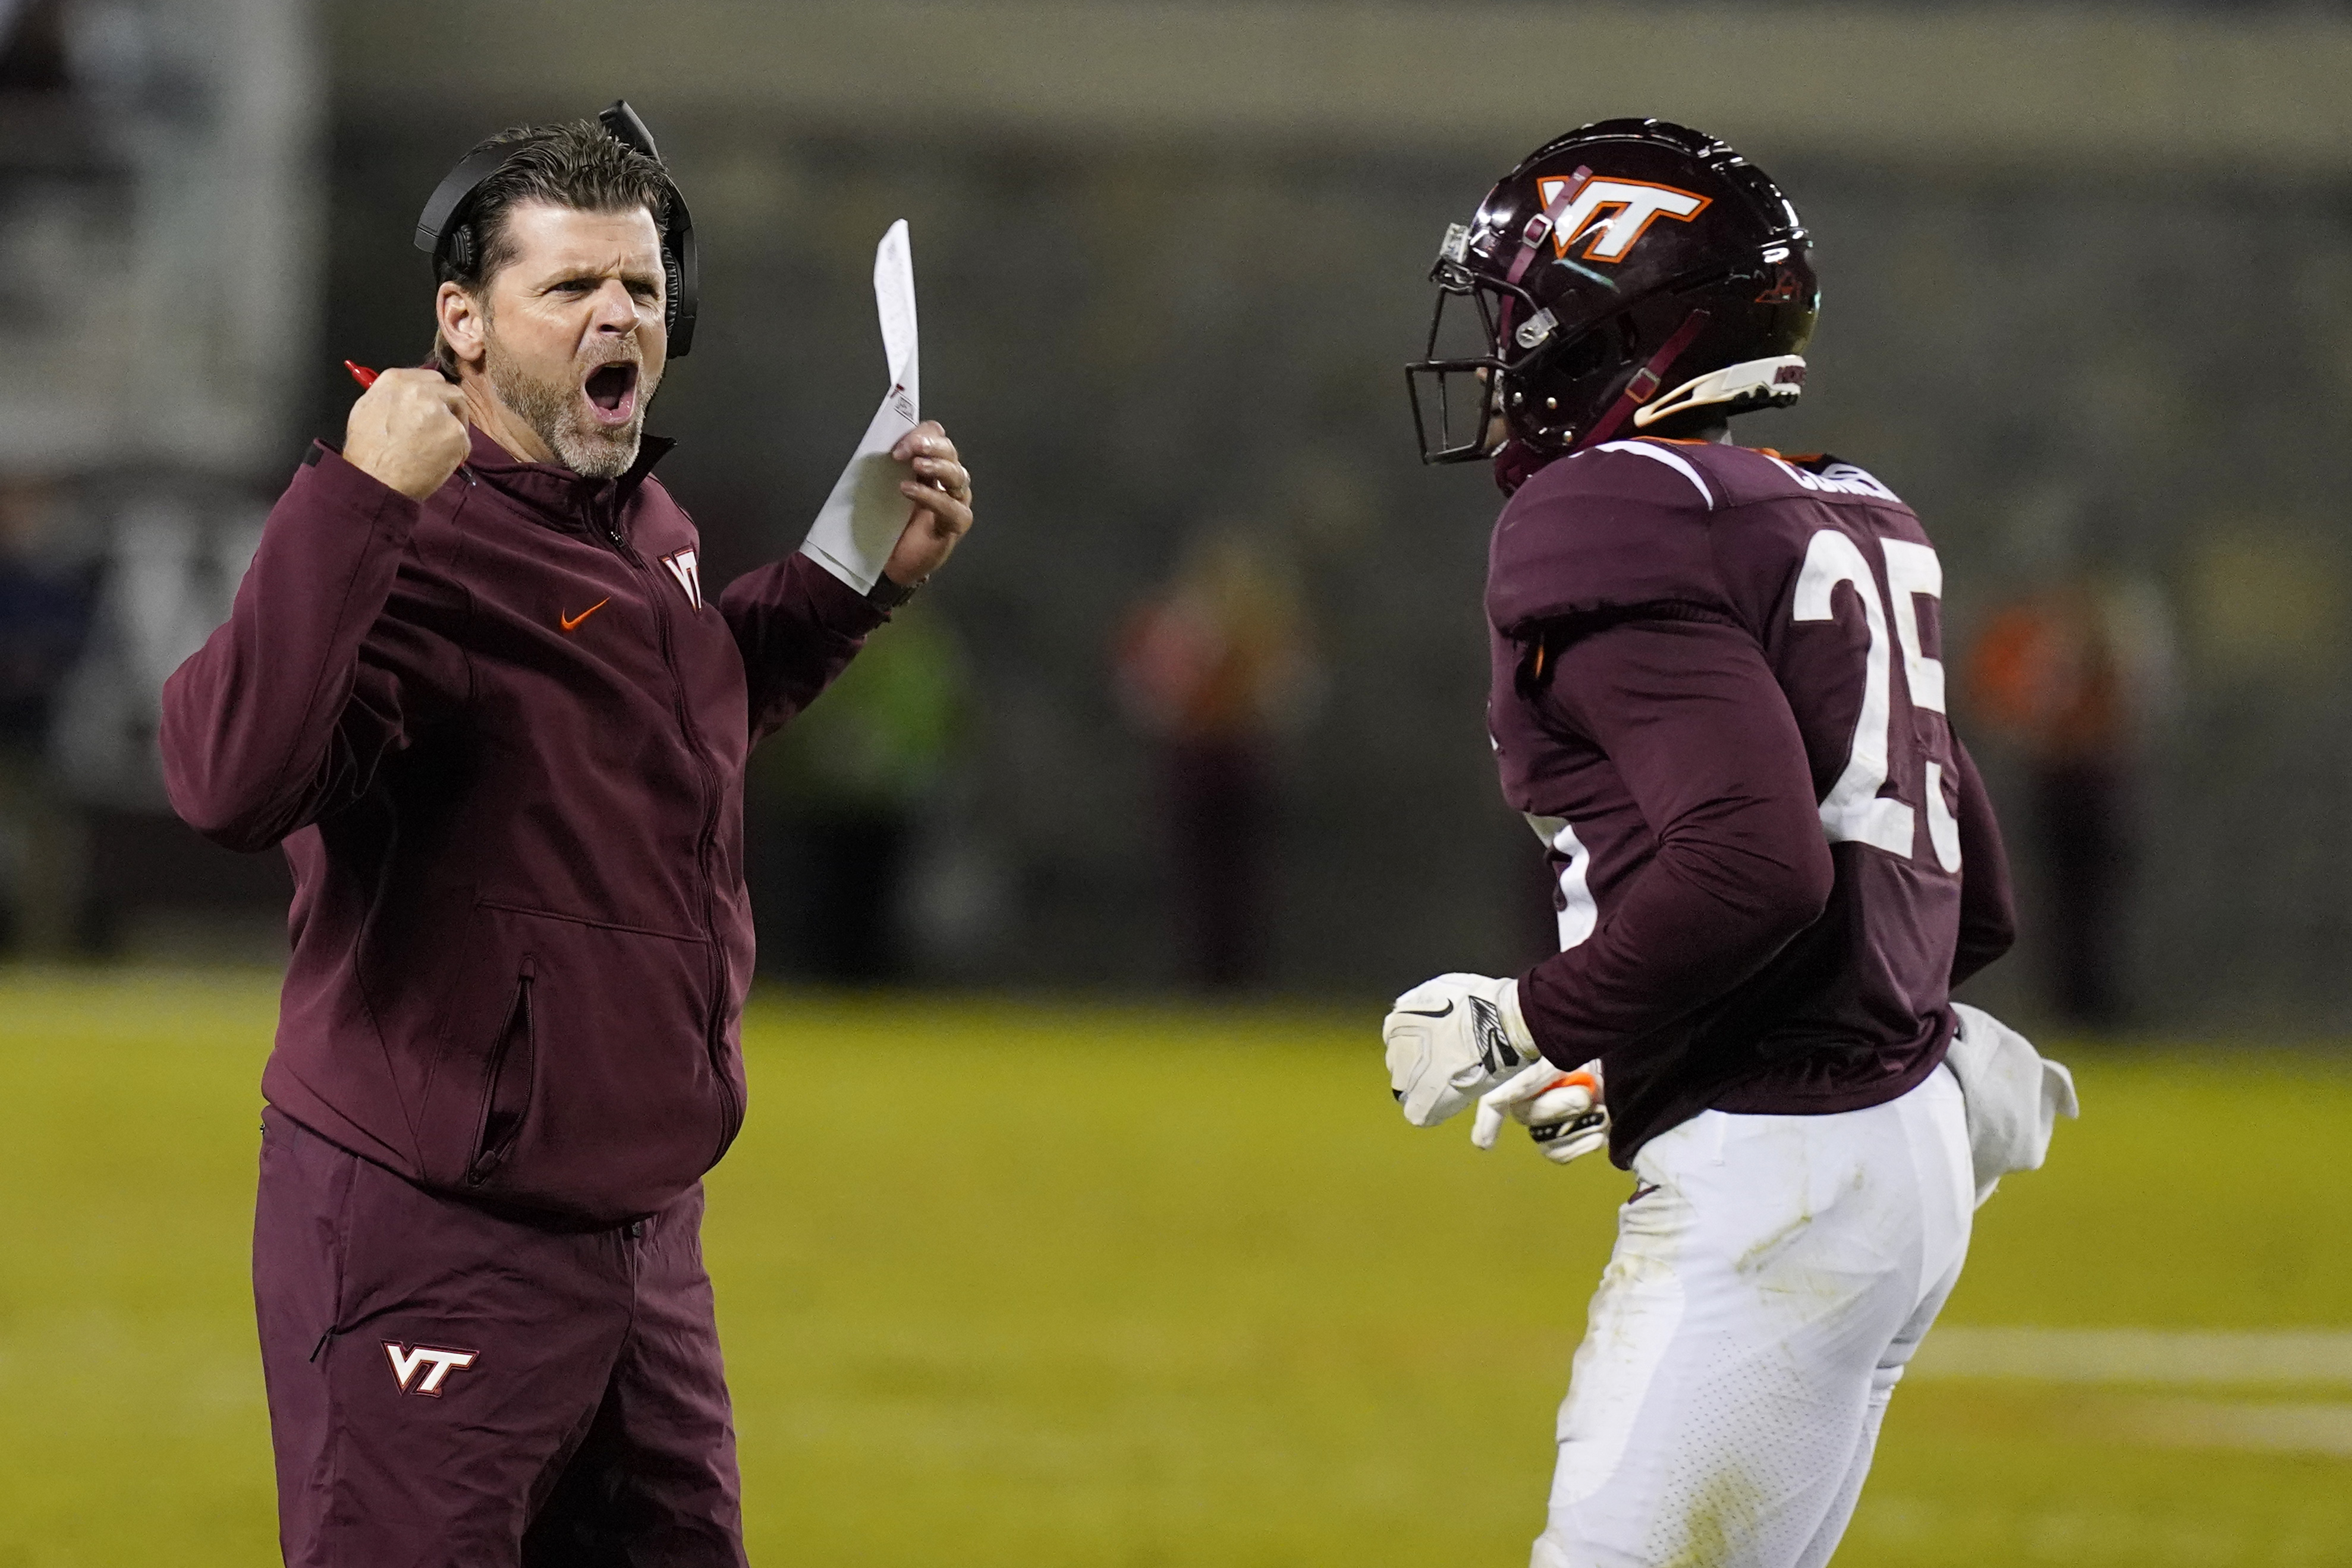 Virginia Tech Spring Game 2023 Live stream, start time, how to watch Springfield native Will Watson III